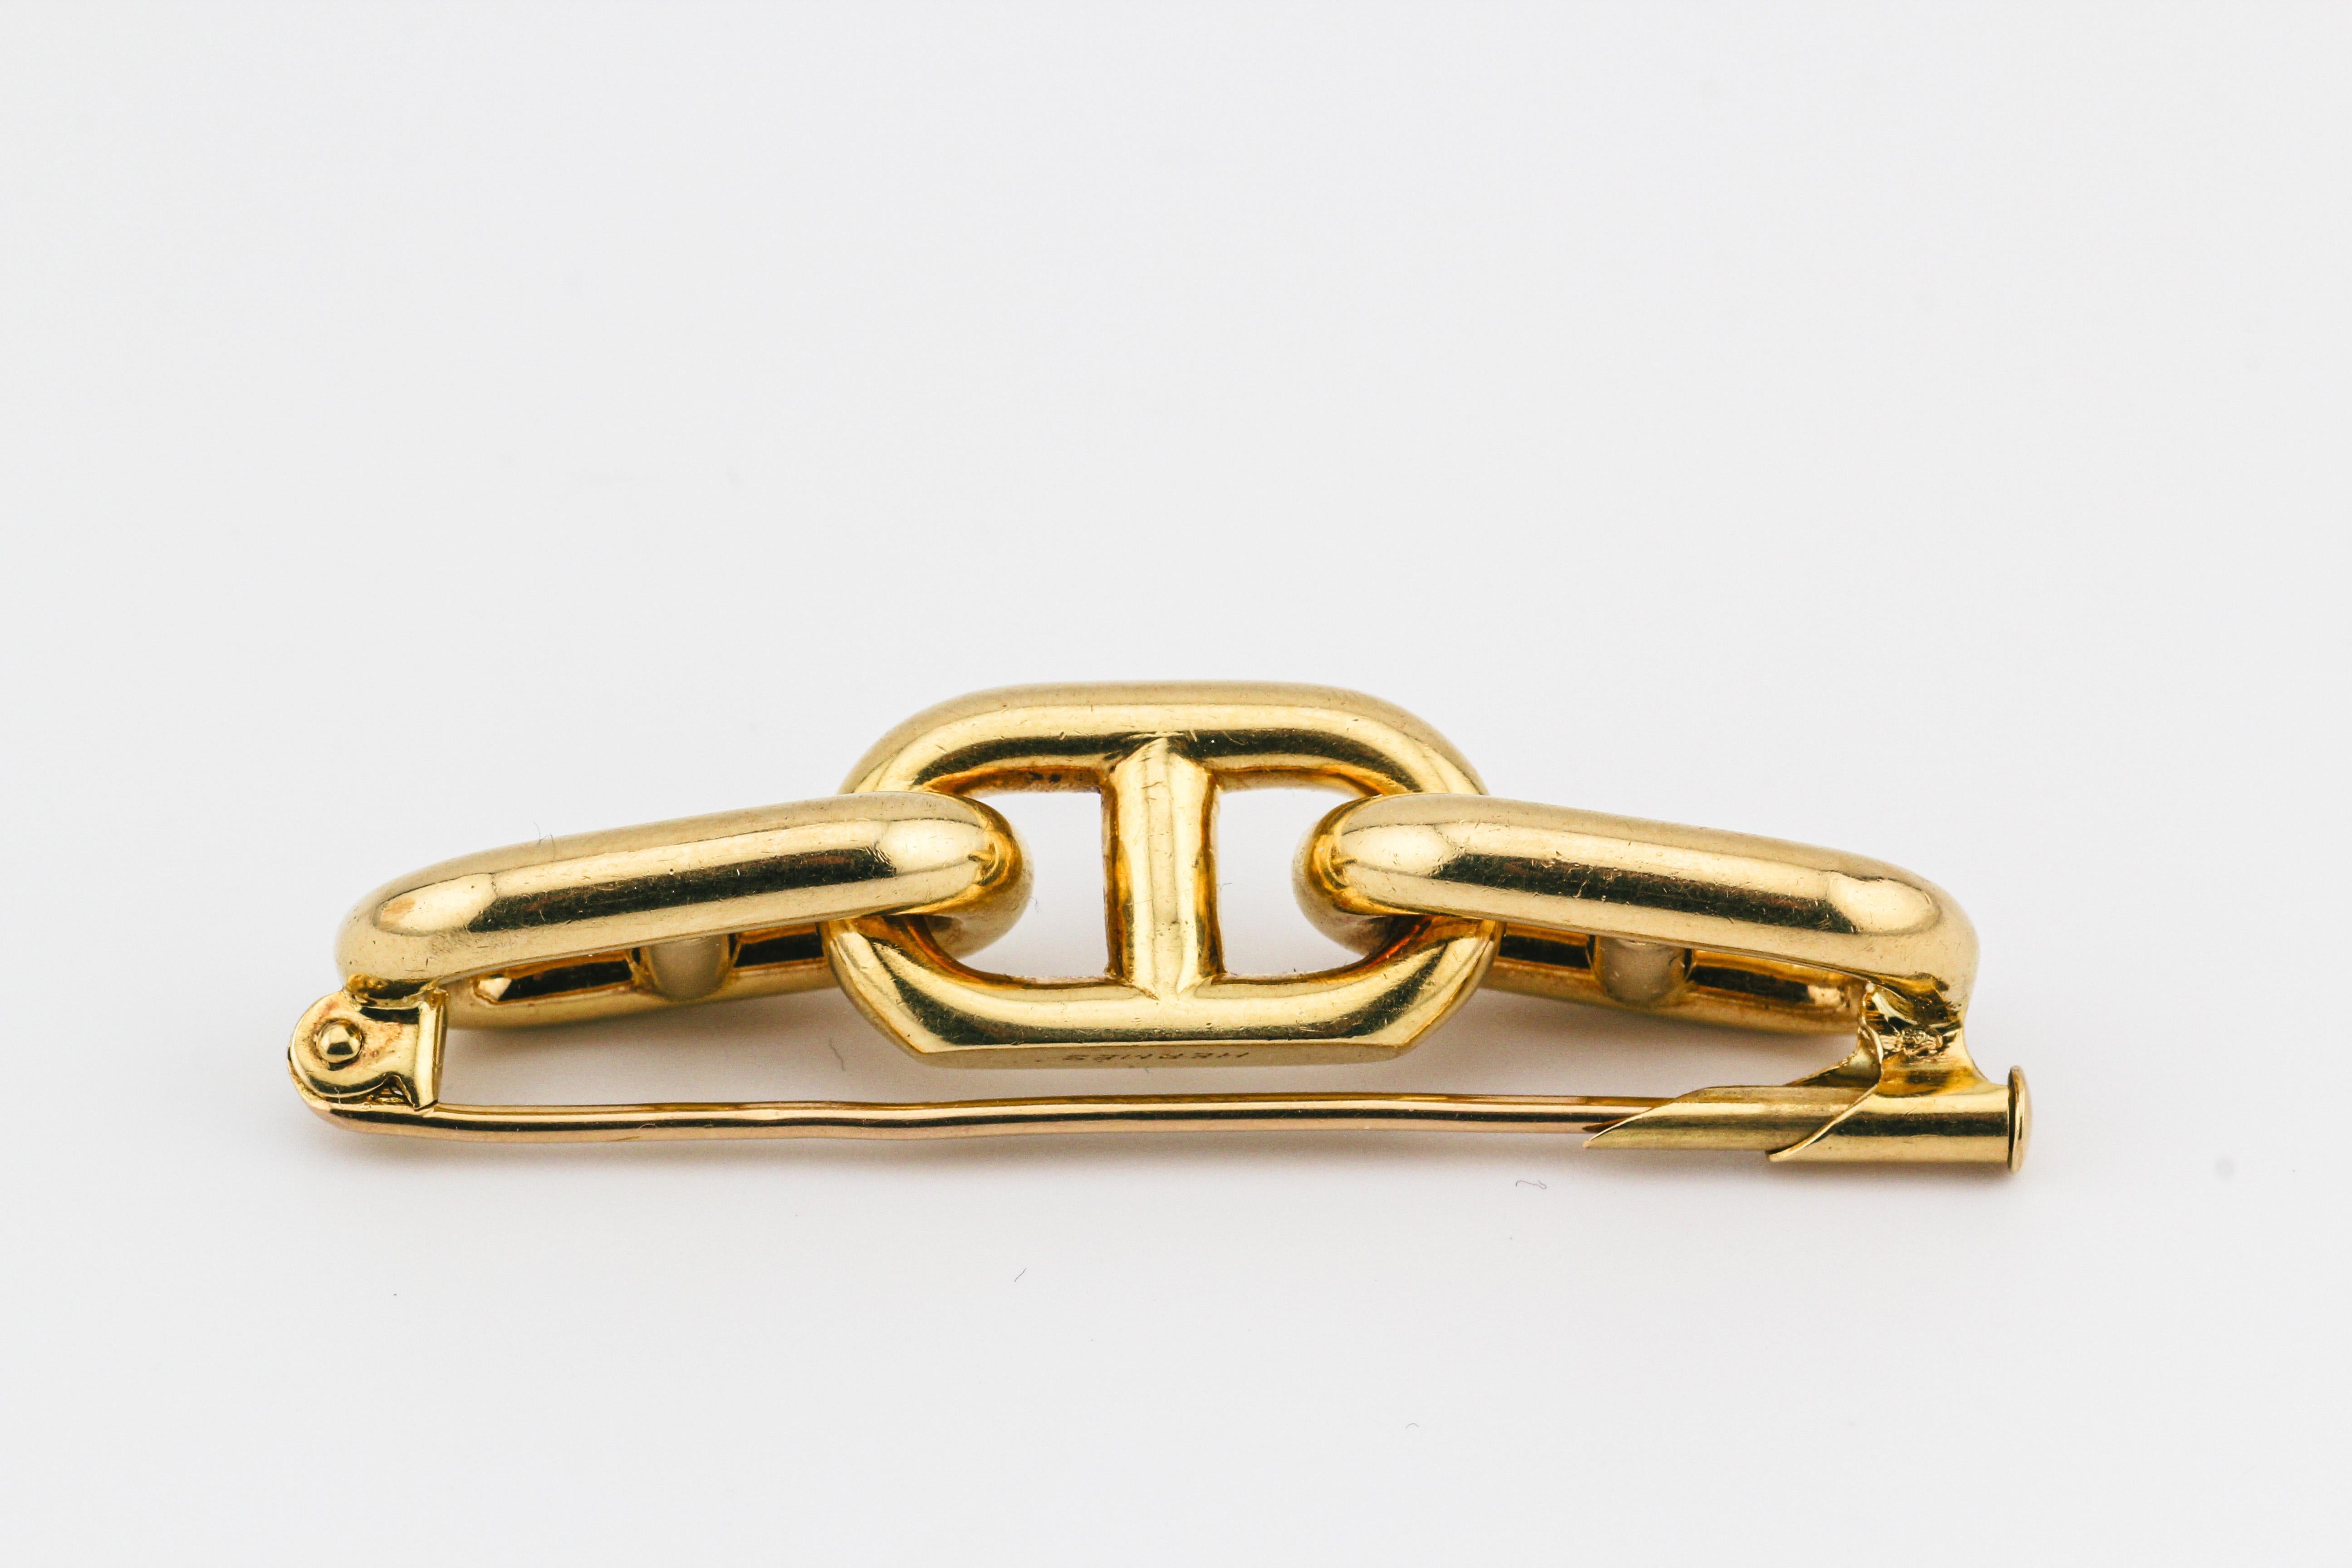 Hermes Vintage 1970s Chaine D'Ancre 18k Gold Brooch In Good Condition For Sale In Bellmore, NY